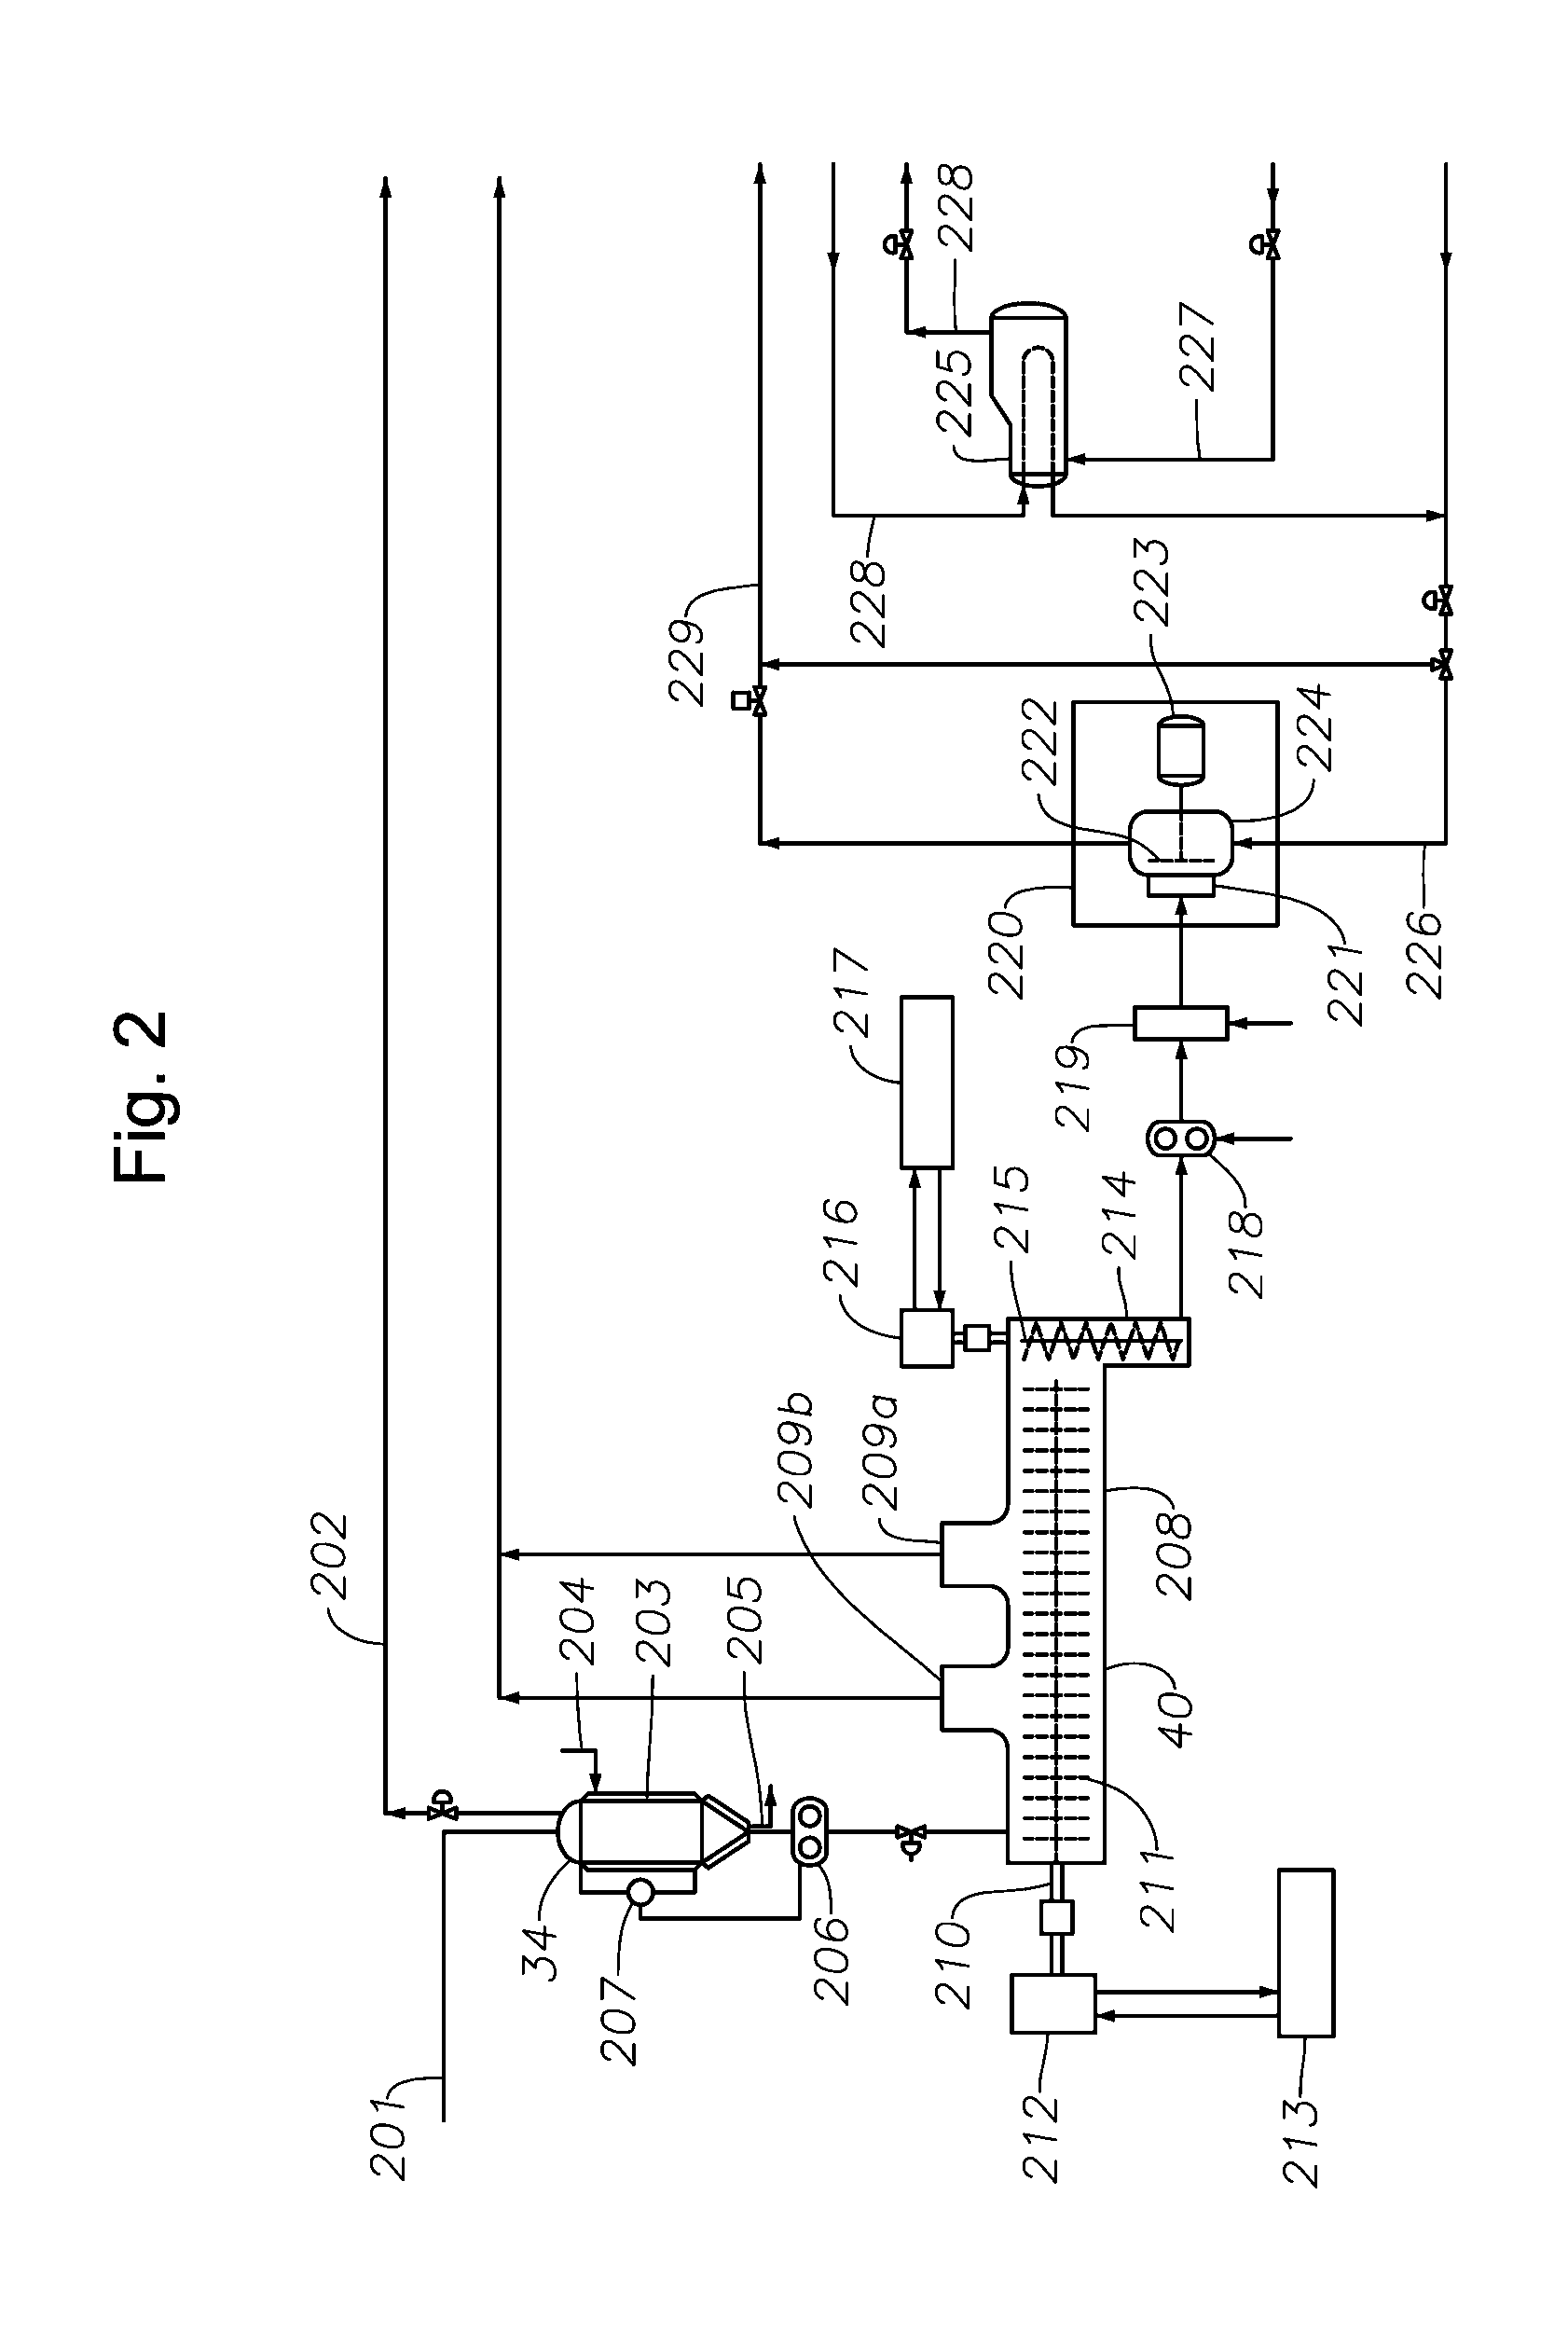 Processes And Apparatus For Polymer Finishing And Packaging